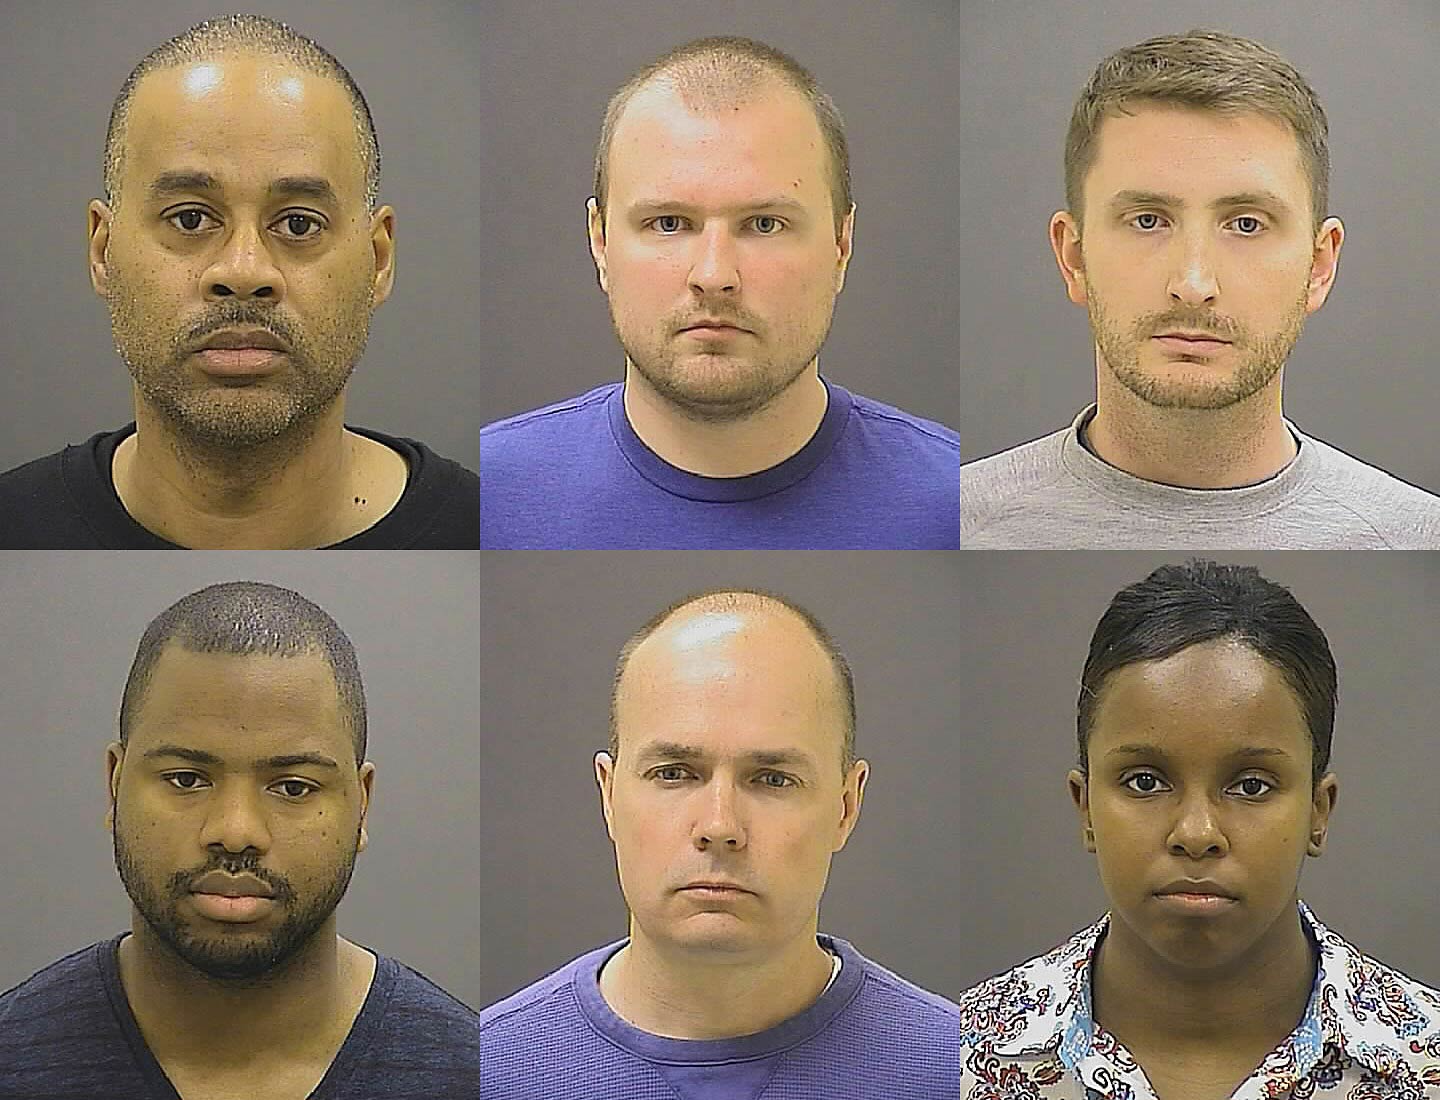 From top left left: Caesar R. Goodson Jr., Garrett E. Miller and Edward M. Nero, and bottom row from left: William G. Porter, Brian W. Rice and Alicia D. White, the six police officers charged with felonies ranging from assault to murder in the death of Freddie Gray. (Baltimore Police Department/AP)